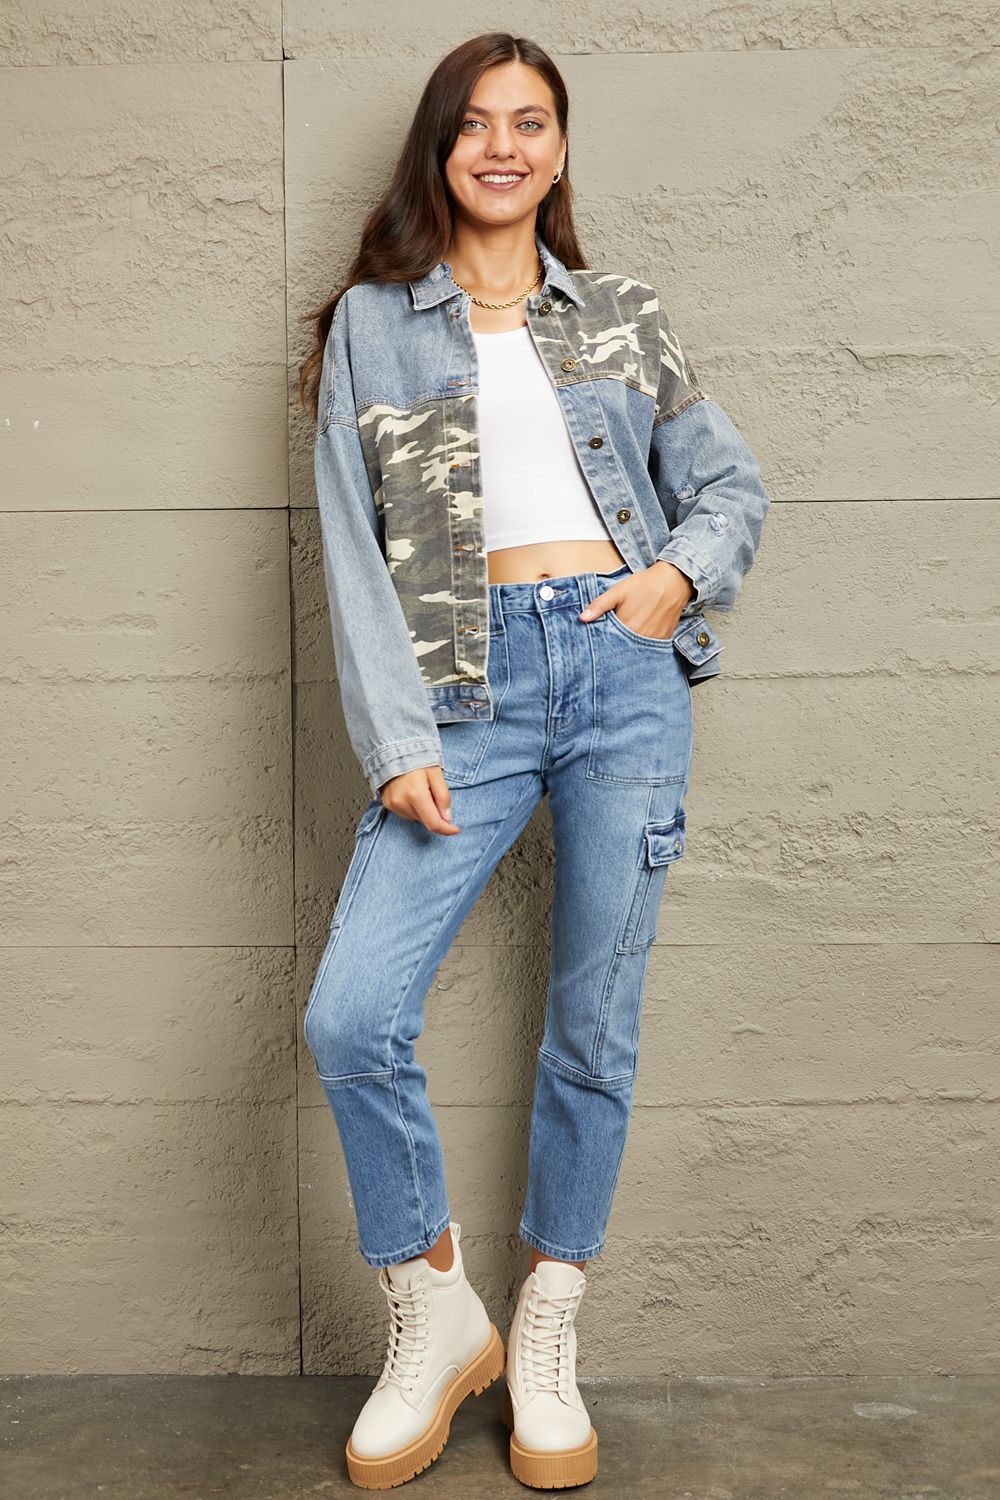 How to Wear a Denim Jacket with Confidence (+ 14 Outfit Ideas)